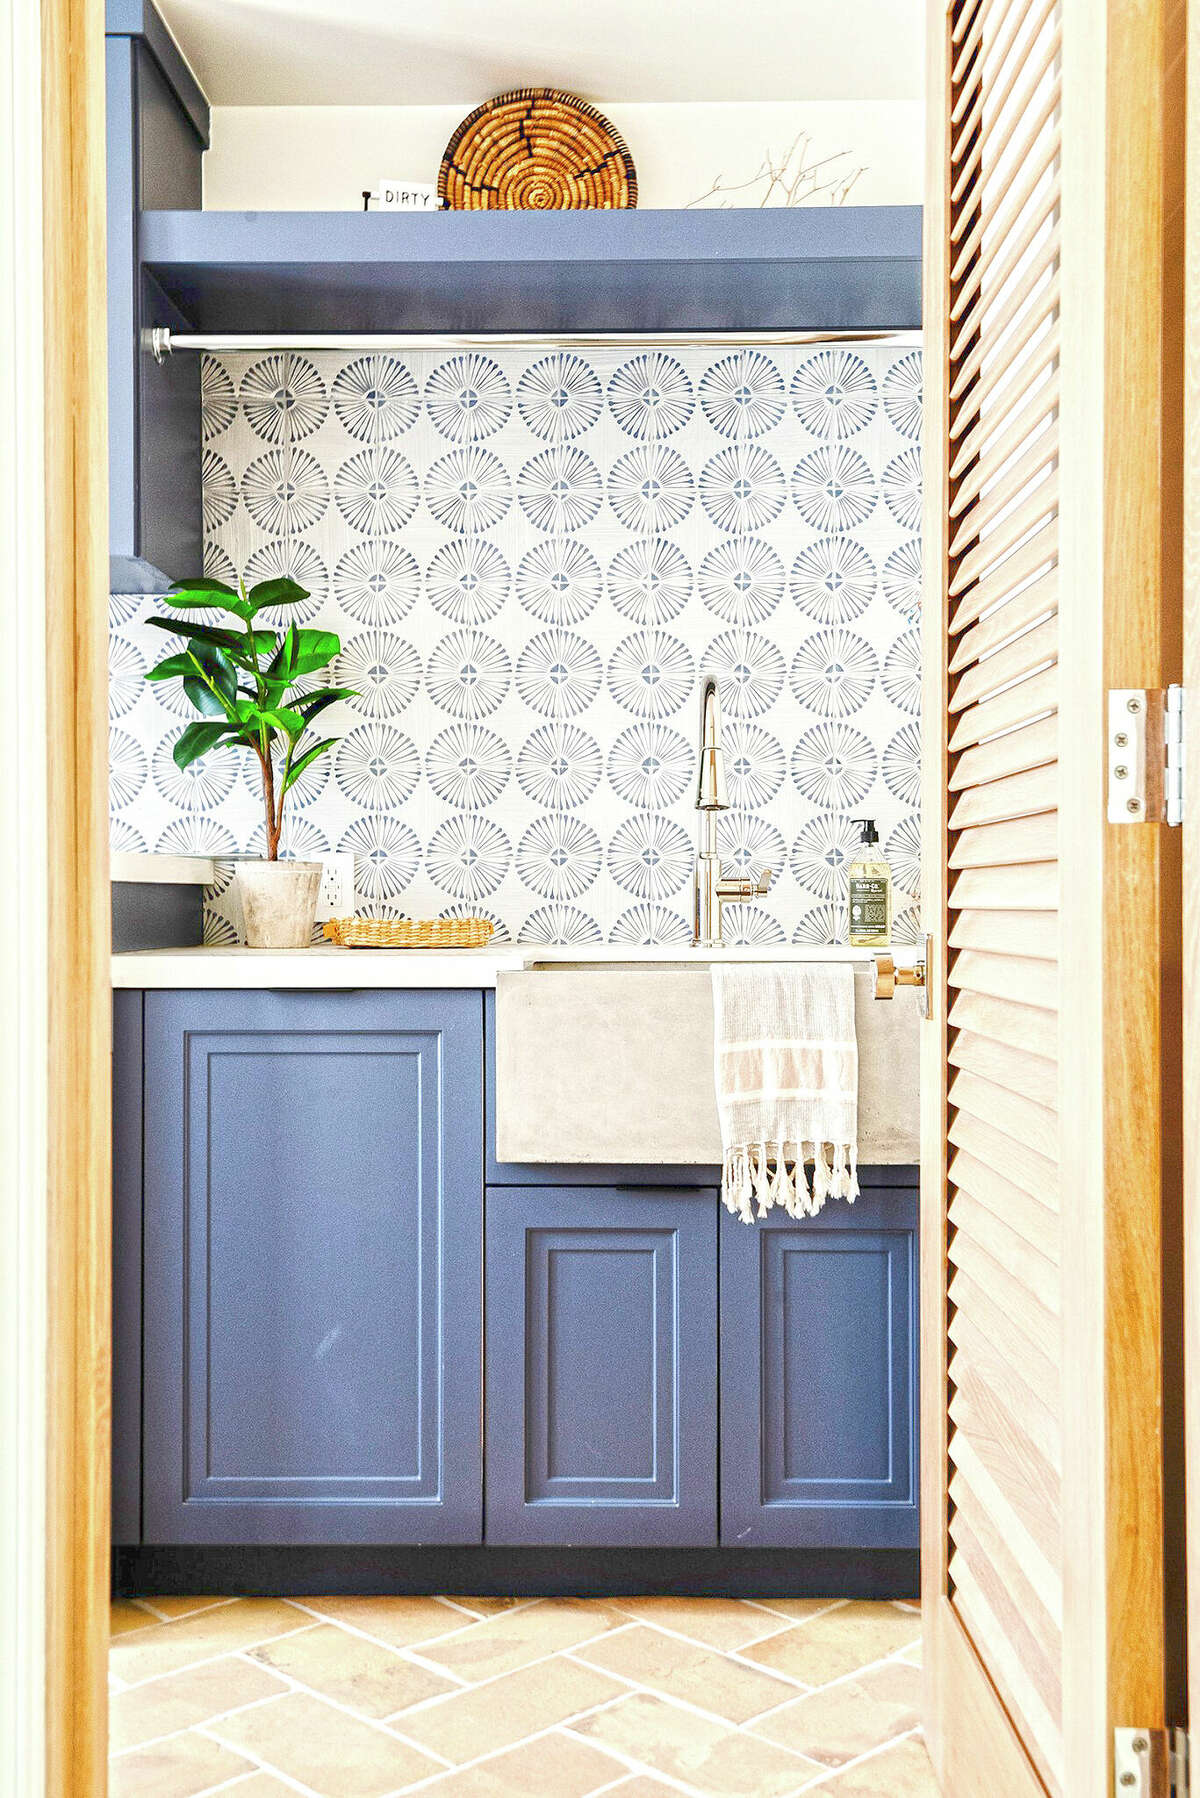 Laundry rooms no longer need to be hidden. Hillary Stamm of HMS Interior Design says, "This is a space you aren't in for hours (let's hope!) so have some fun. A textured tile or an intricate design with a splash of color can work wonders here."